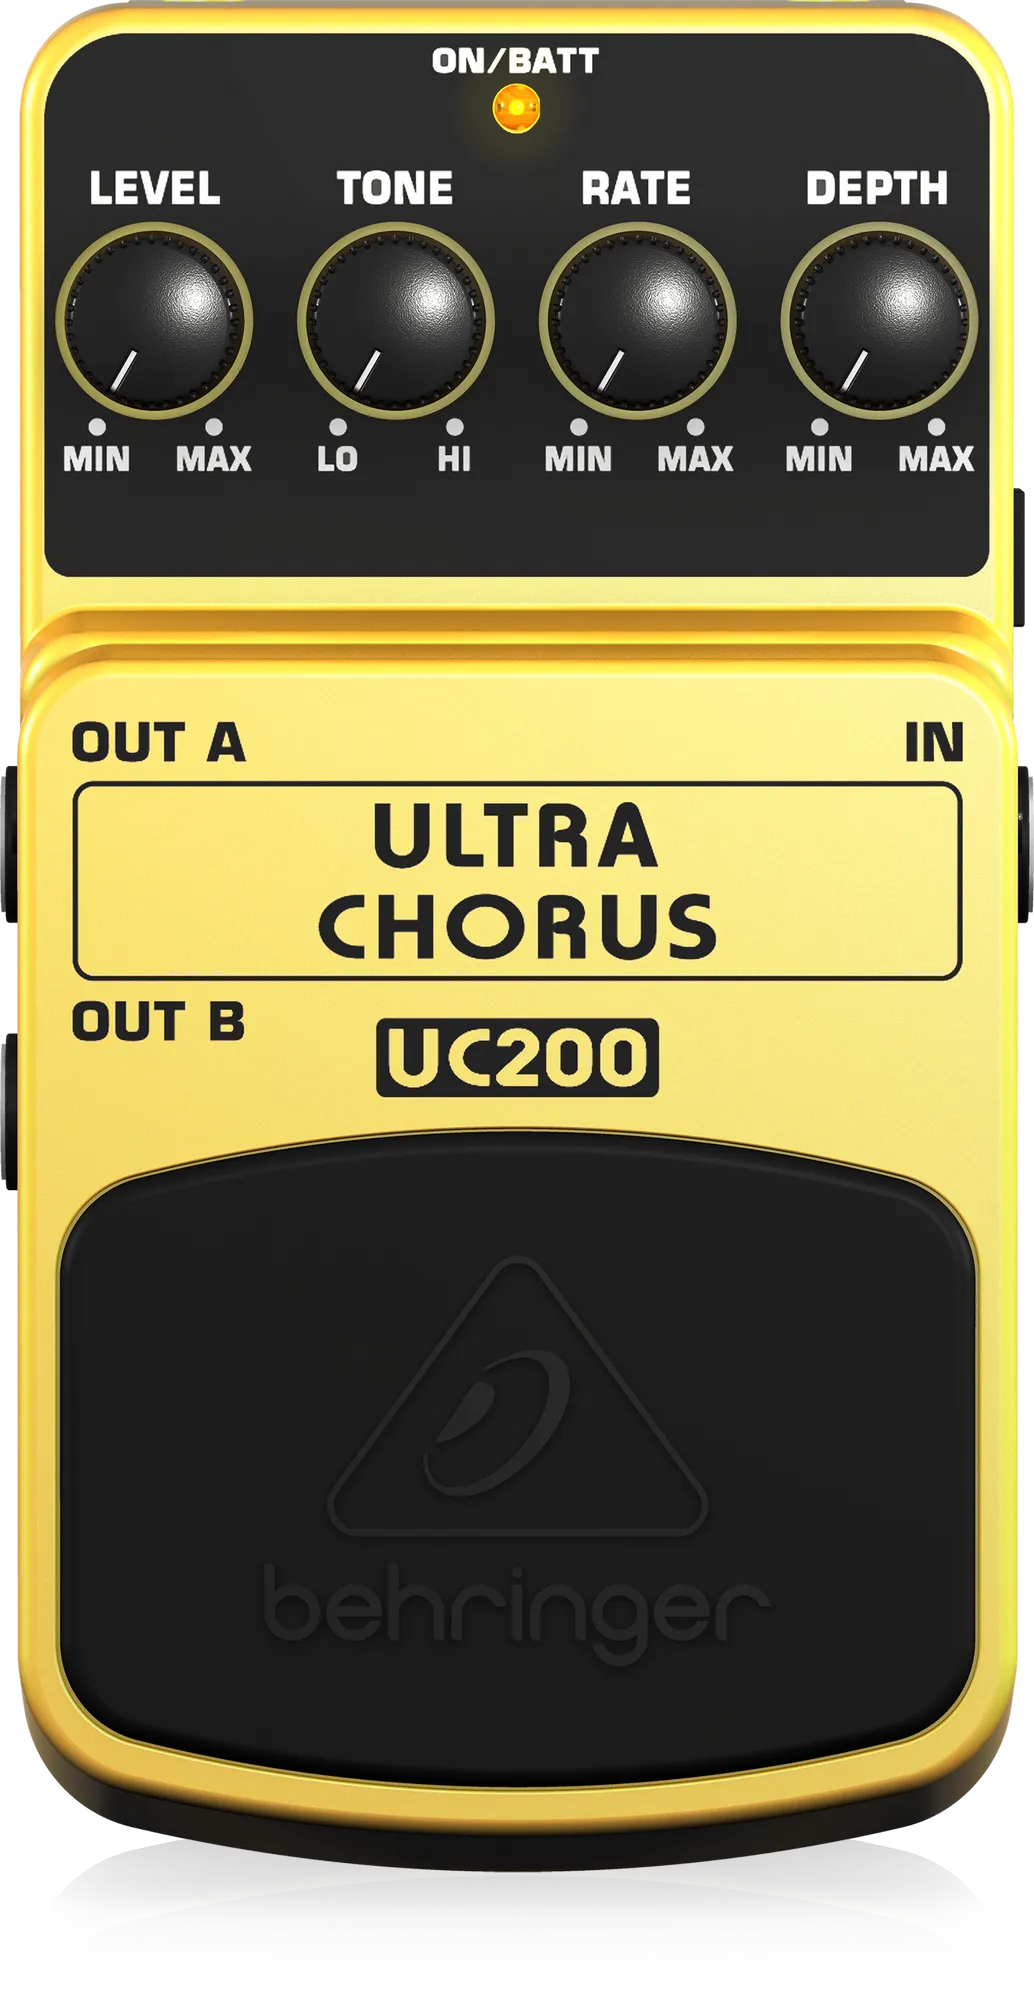 UC200 Ultra Chorus Guitar Pedal By Behringer